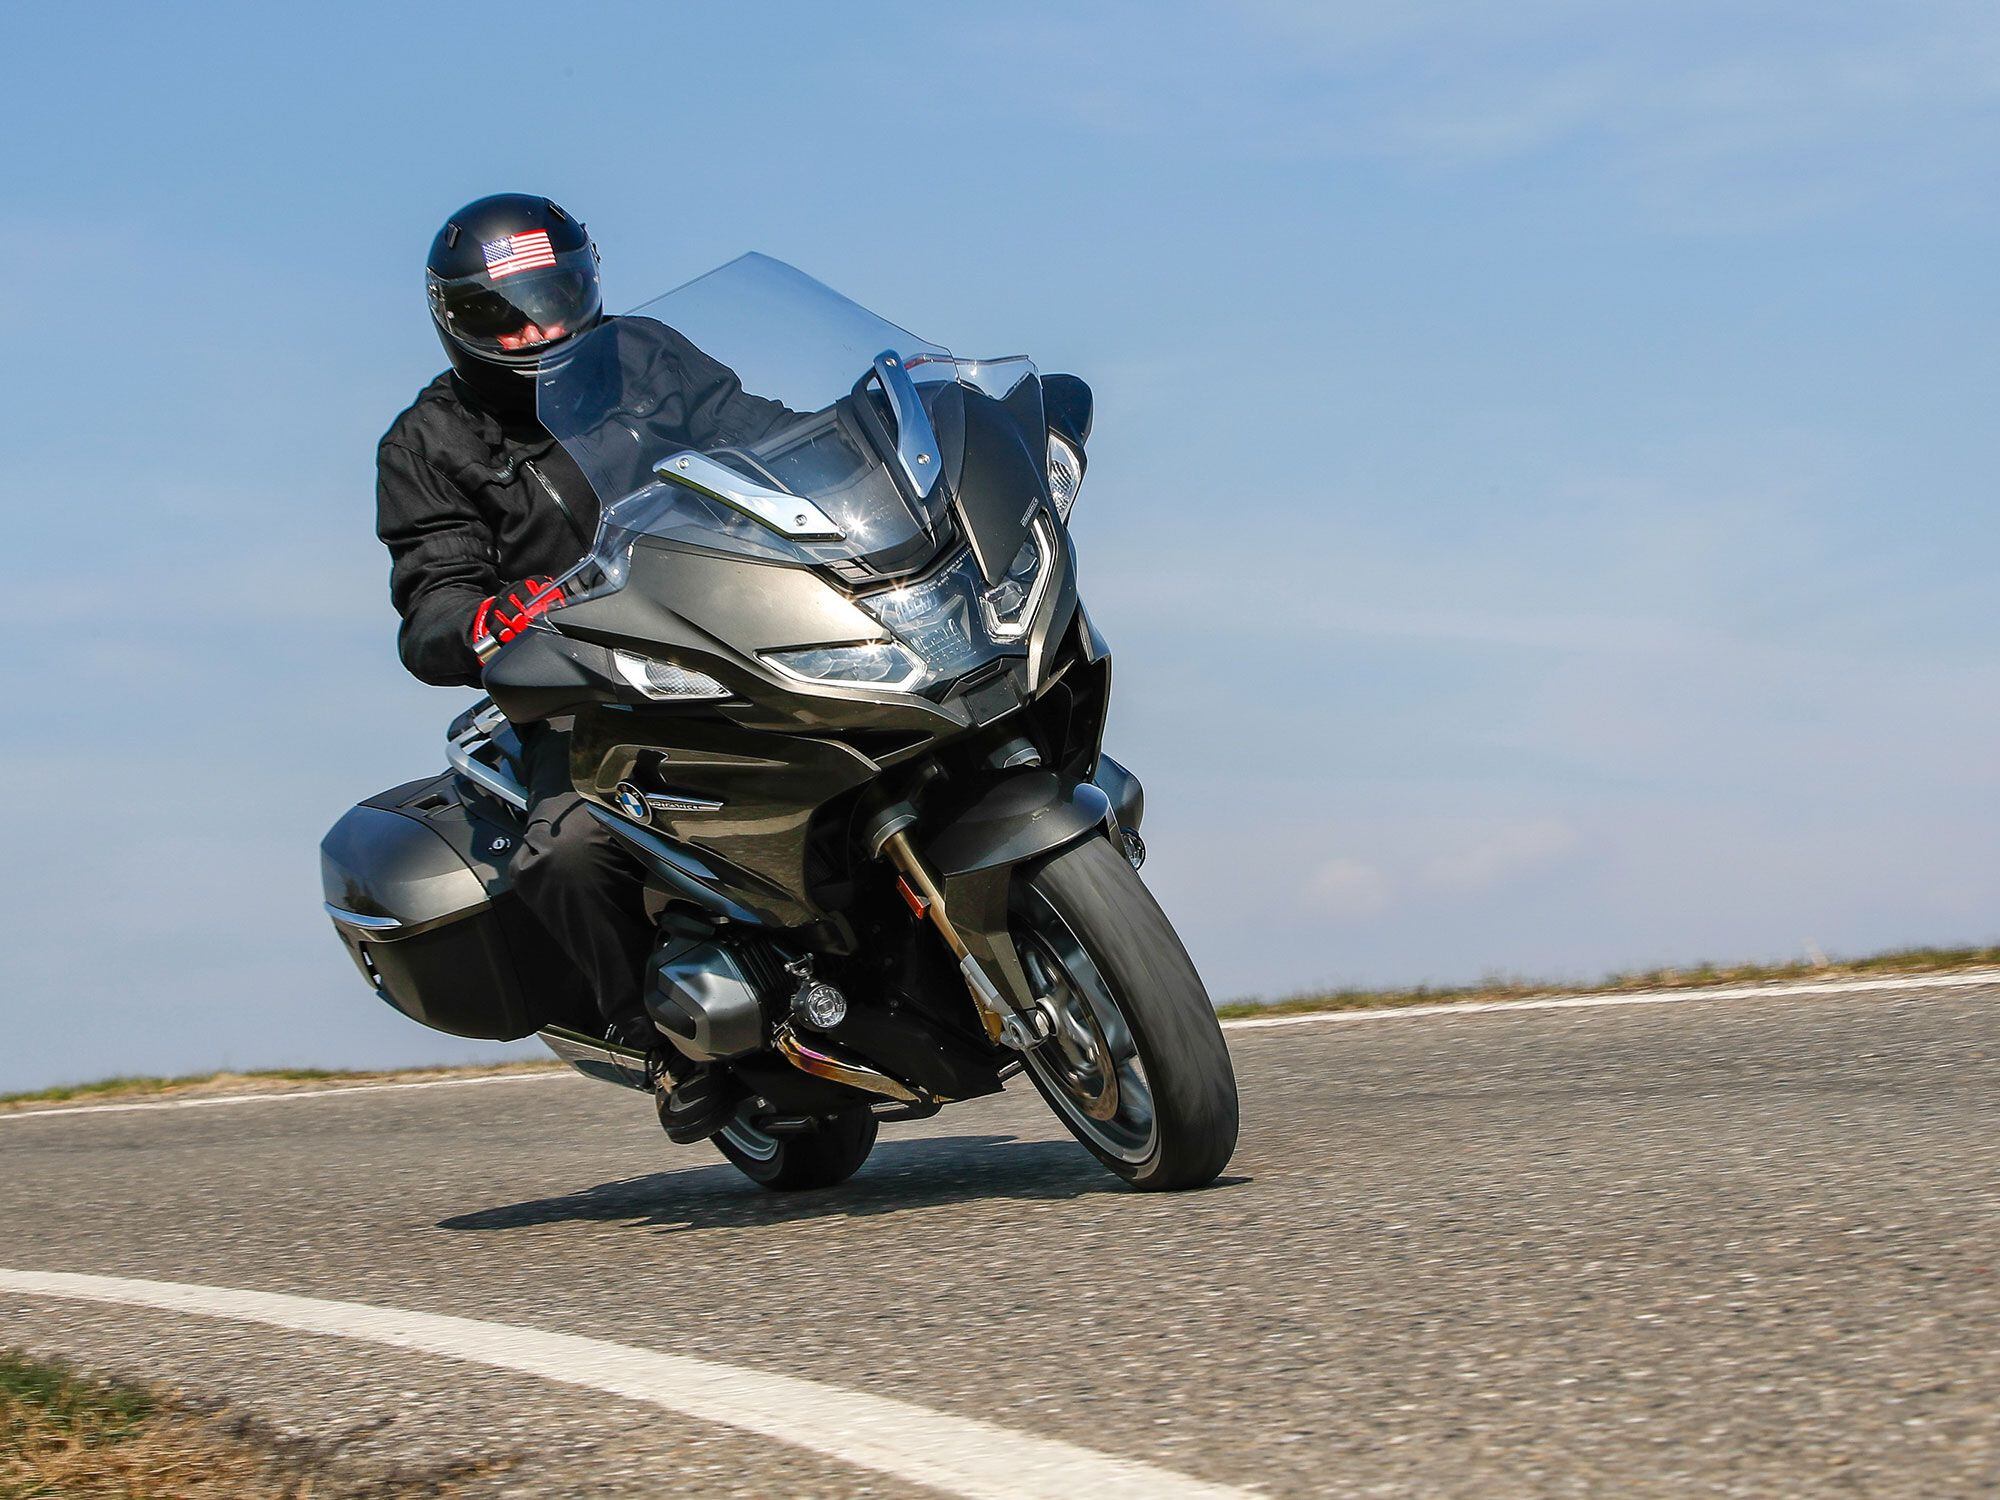 A flat torque curve lets the R 1250 RT come out of corners with ease.